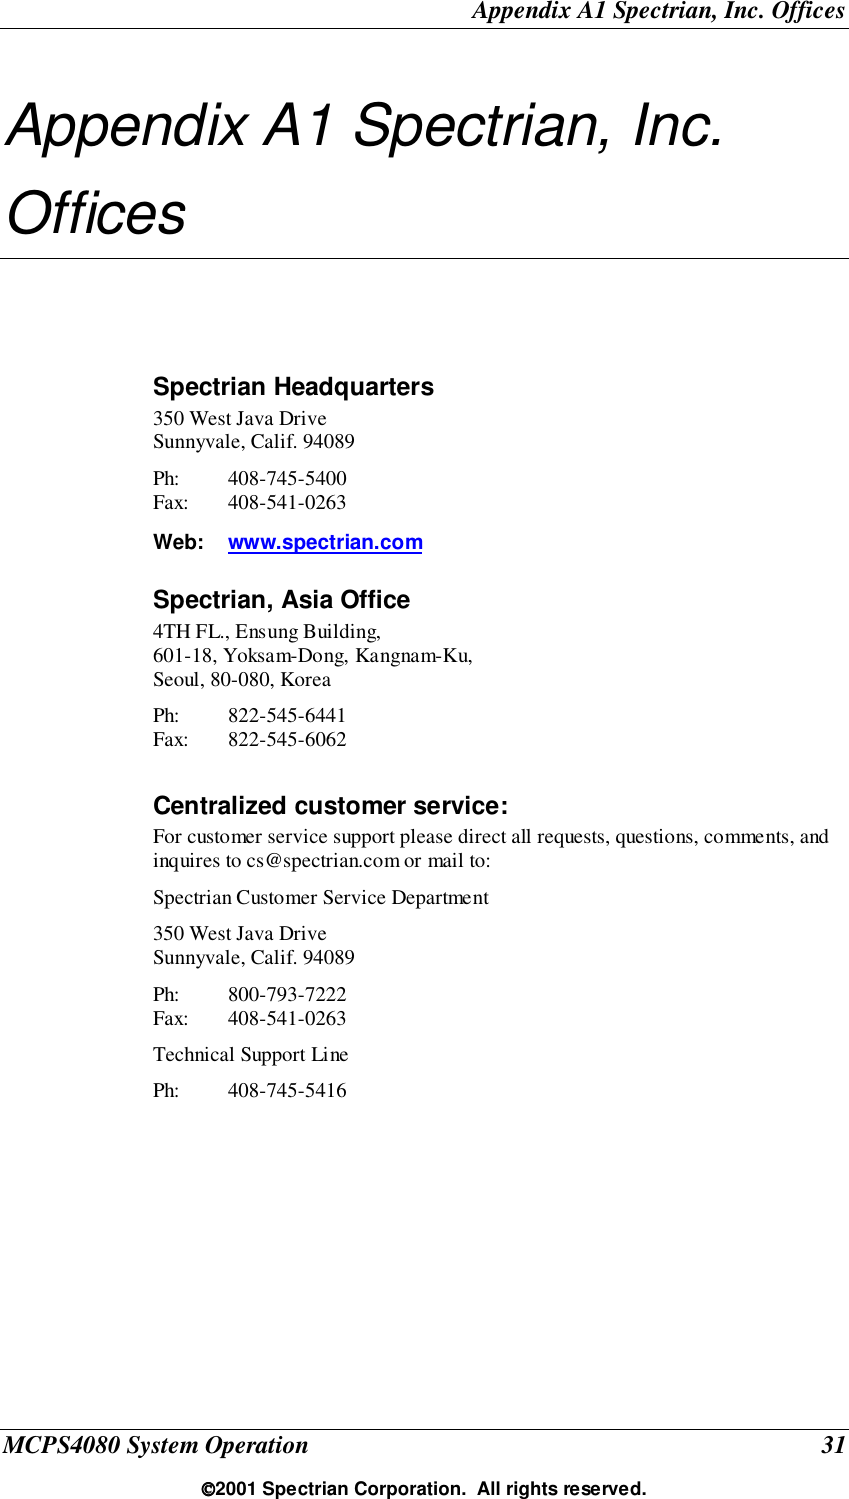 Appendix A1 Spectrian, Inc. OfficesMCPS4080 System Operation 312001 Spectrian Corporation.  All rights reserved.Appendix A1 Spectrian, Inc.OfficesSpectrian Headquarters350 West Java DriveSunnyvale, Calif. 94089Ph: 408-745-5400Fax: 408-541-0263Web: www.spectrian.comSpectrian, Asia Office4TH FL., Ensung Building,601-18, Yoksam-Dong, Kangnam-Ku,Seoul, 80-080, KoreaPh: 822-545-6441Fax: 822-545-6062Centralized customer service:For customer service support please direct all requests, questions, comments, andinquires to cs@spectrian.com or mail to:Spectrian Customer Service Department350 West Java DriveSunnyvale, Calif. 94089Ph: 800-793-7222Fax: 408-541-0263Technical Support LinePh: 408-745-5416